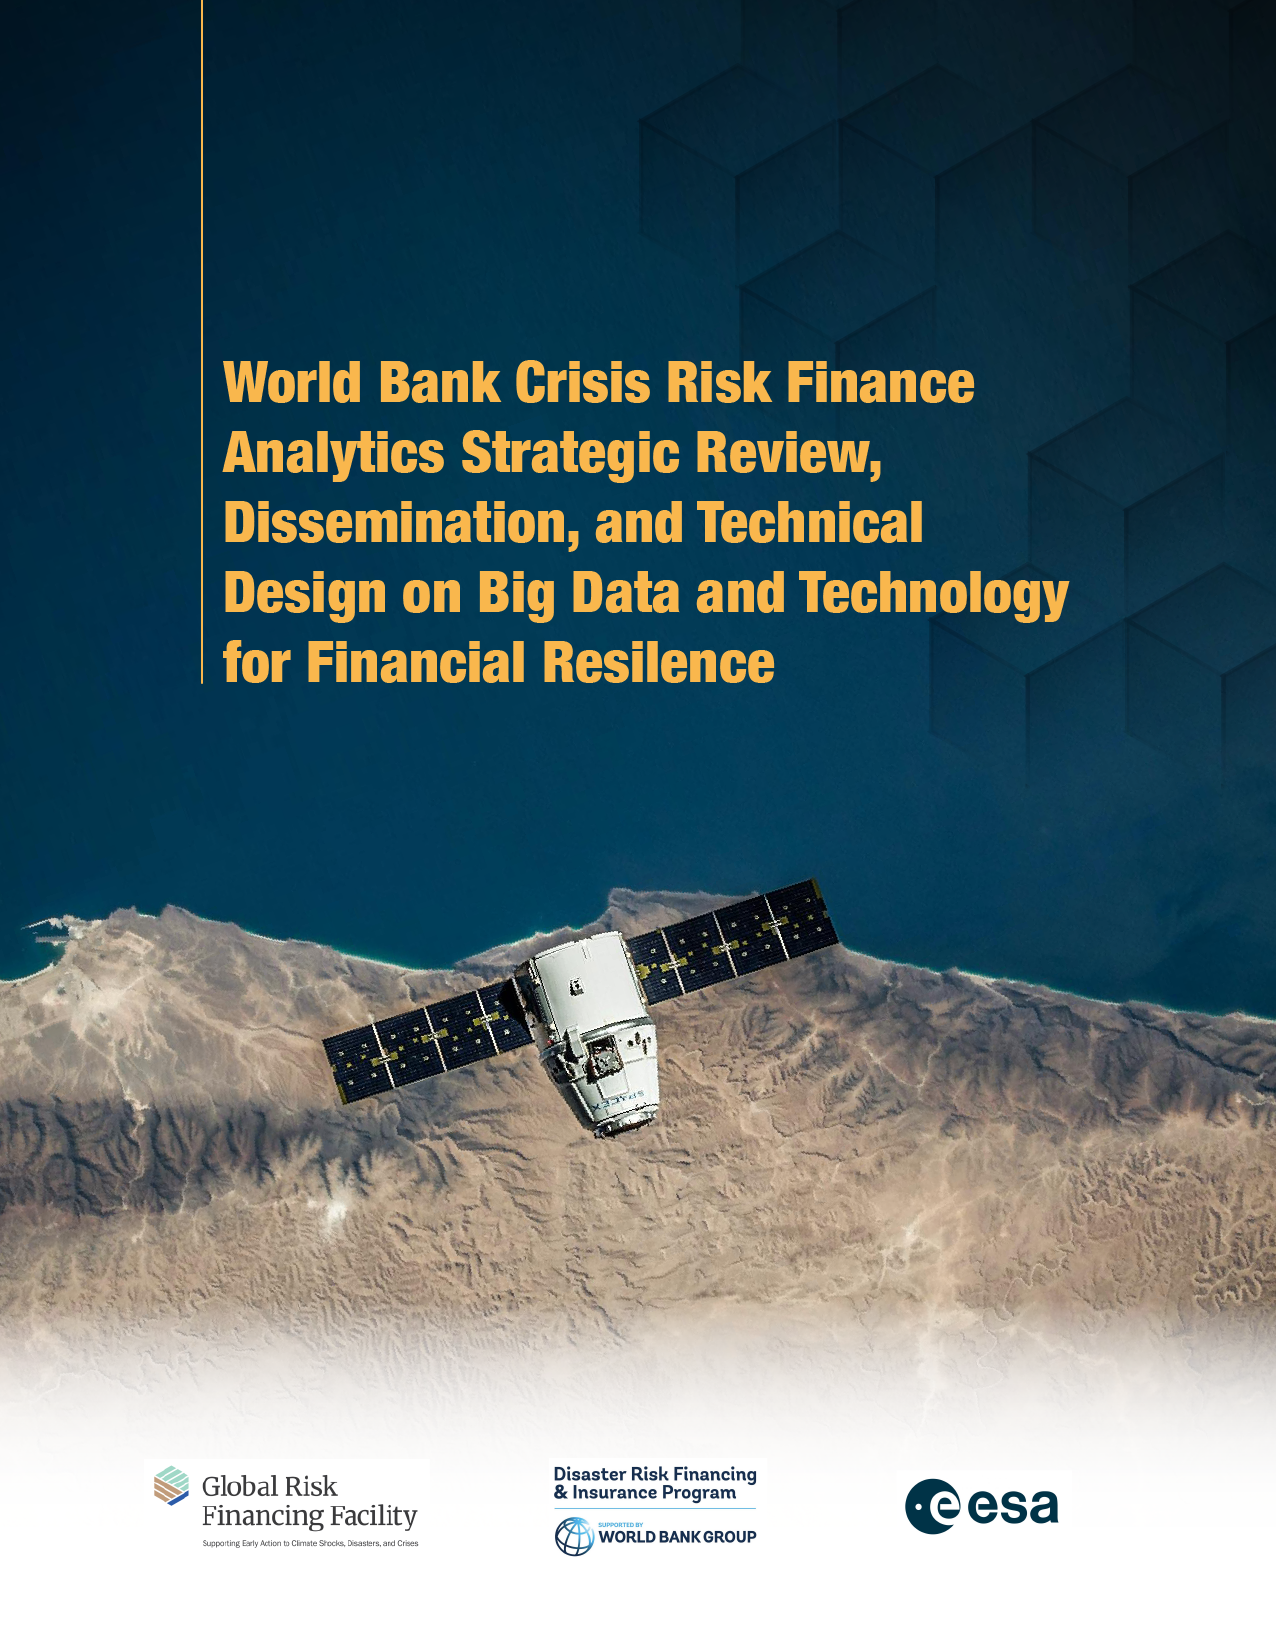 World Bank Crisis Risk Finance Analytics Strategic Review, Dissemination, and Technical Design on Big Data and Technology for Financial Resilience